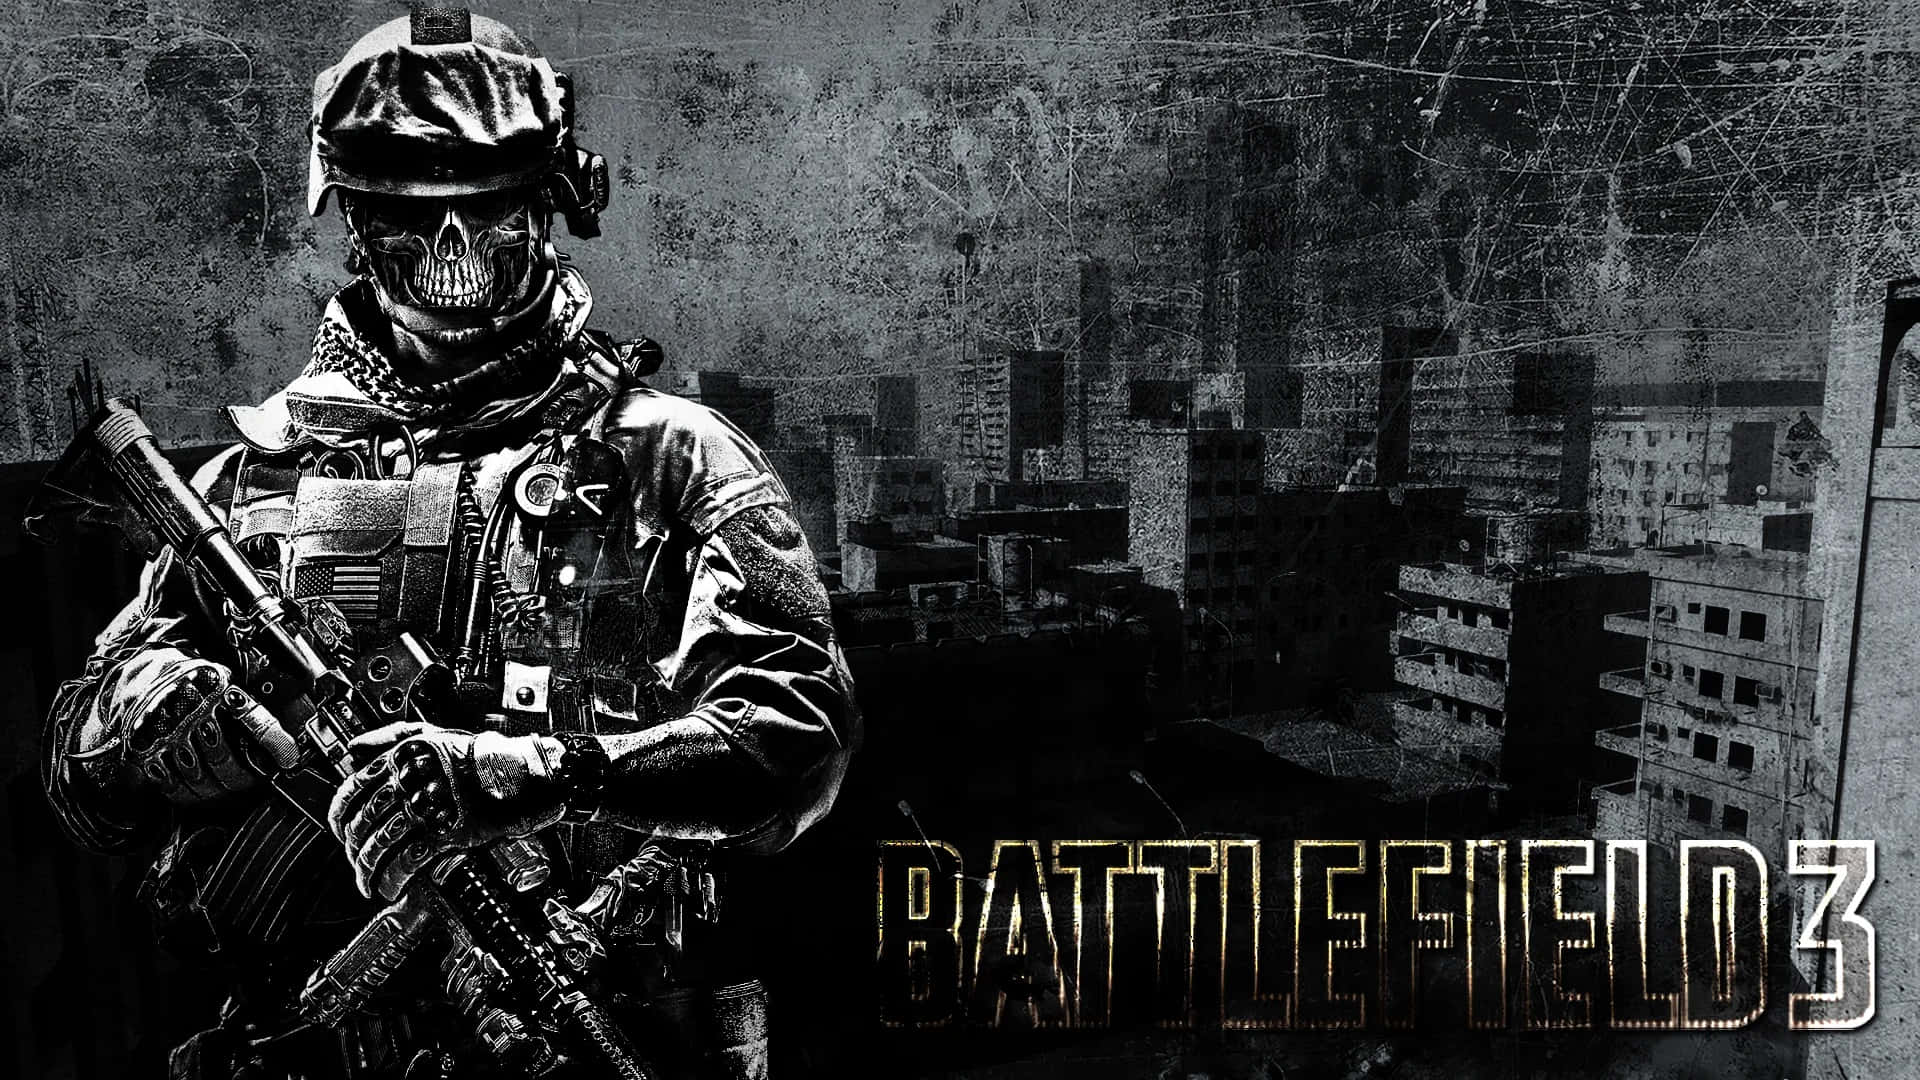 Experience the thrill of modern warfare with Battlefield 3